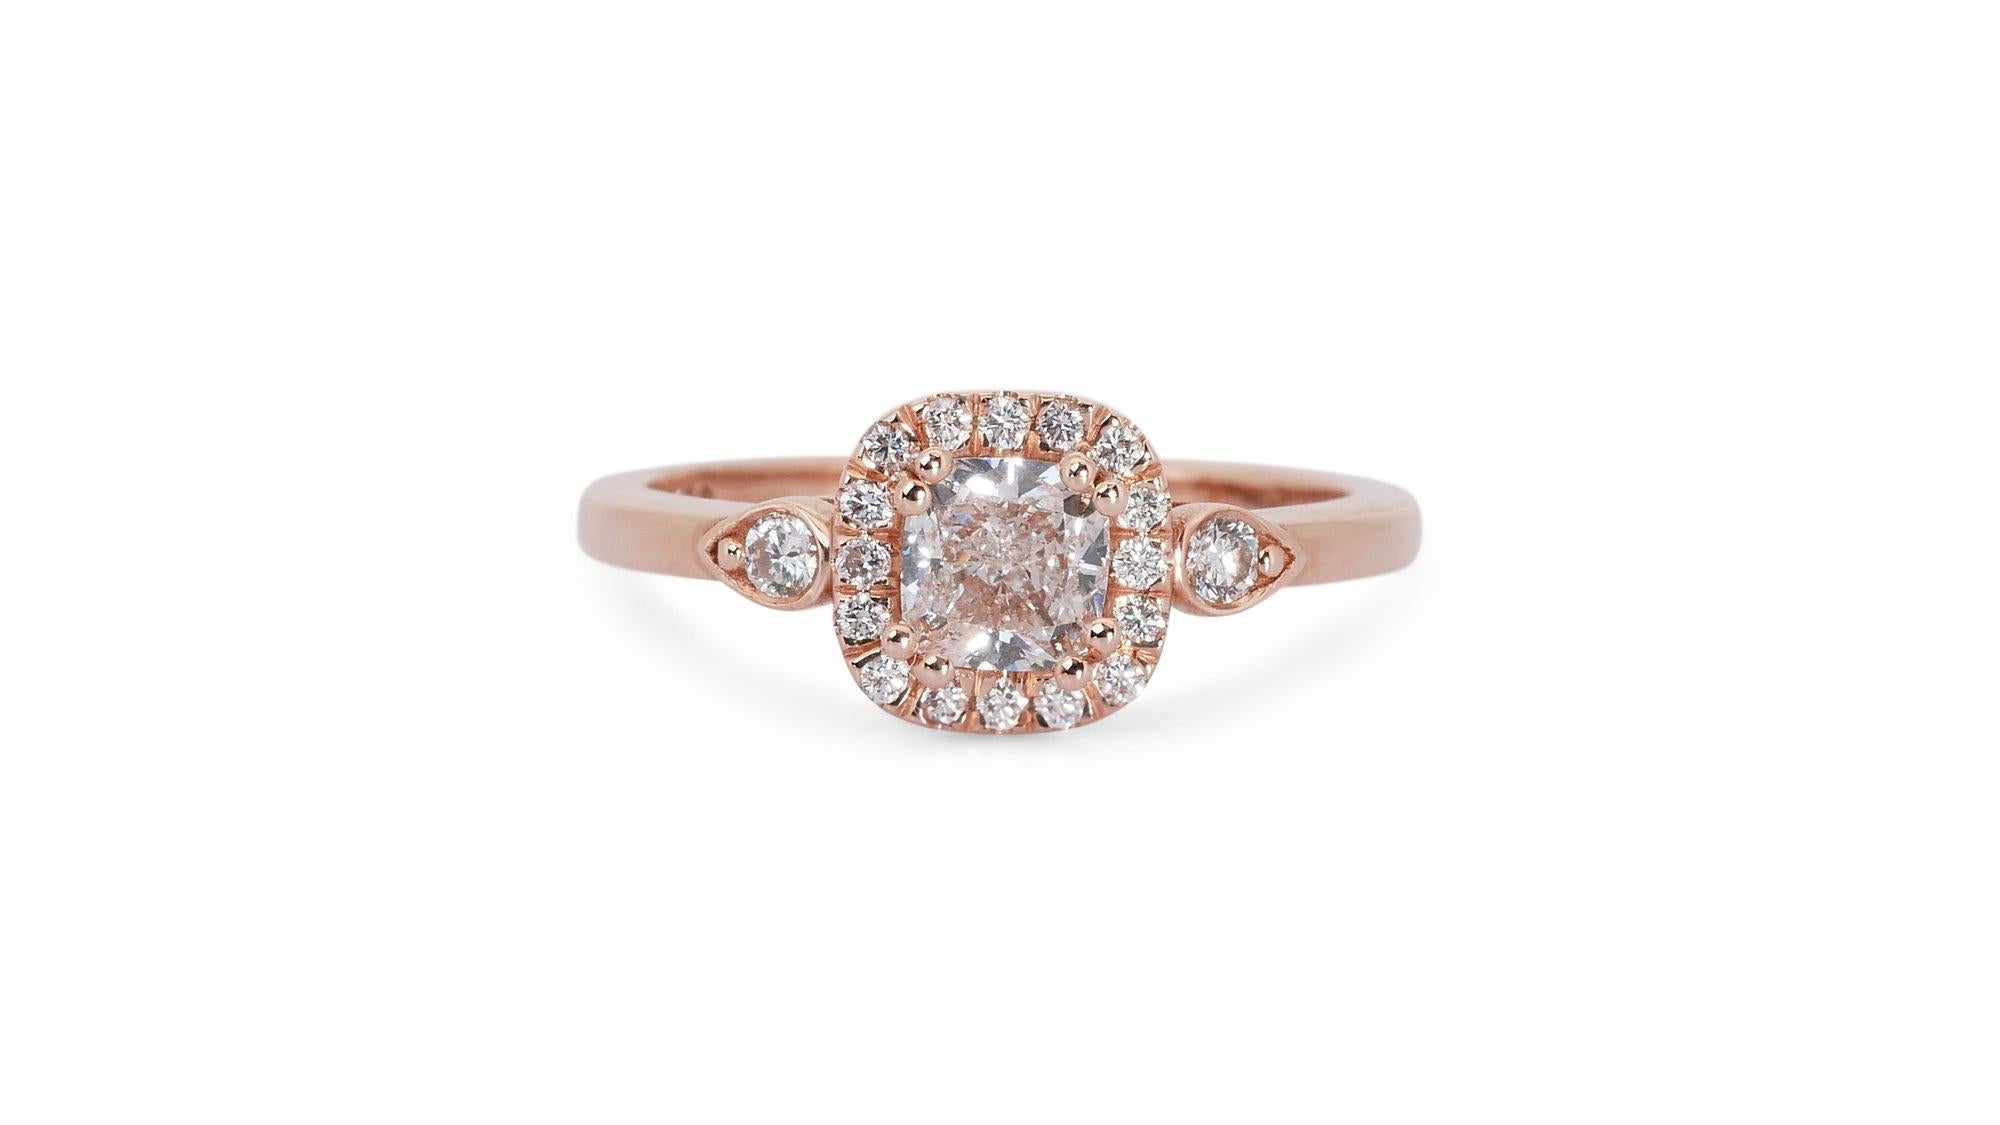 Dazzling 1.10ct Diamonds Halo Ring in 18k Rose Gold - GIA Certified For Sale 3